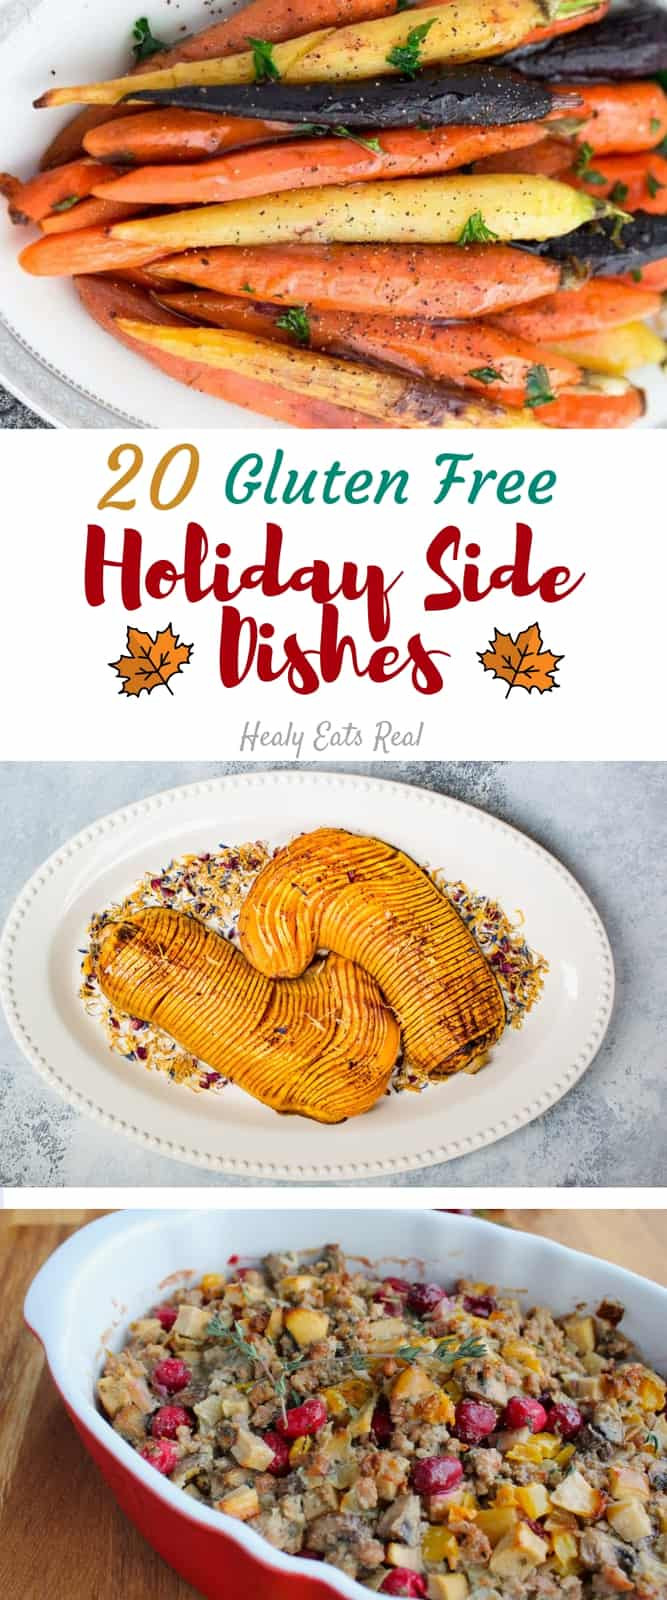 Gluten Free Thanksgiving Sides
 20 Delicious Gluten Free Side Dishes for the Holidays